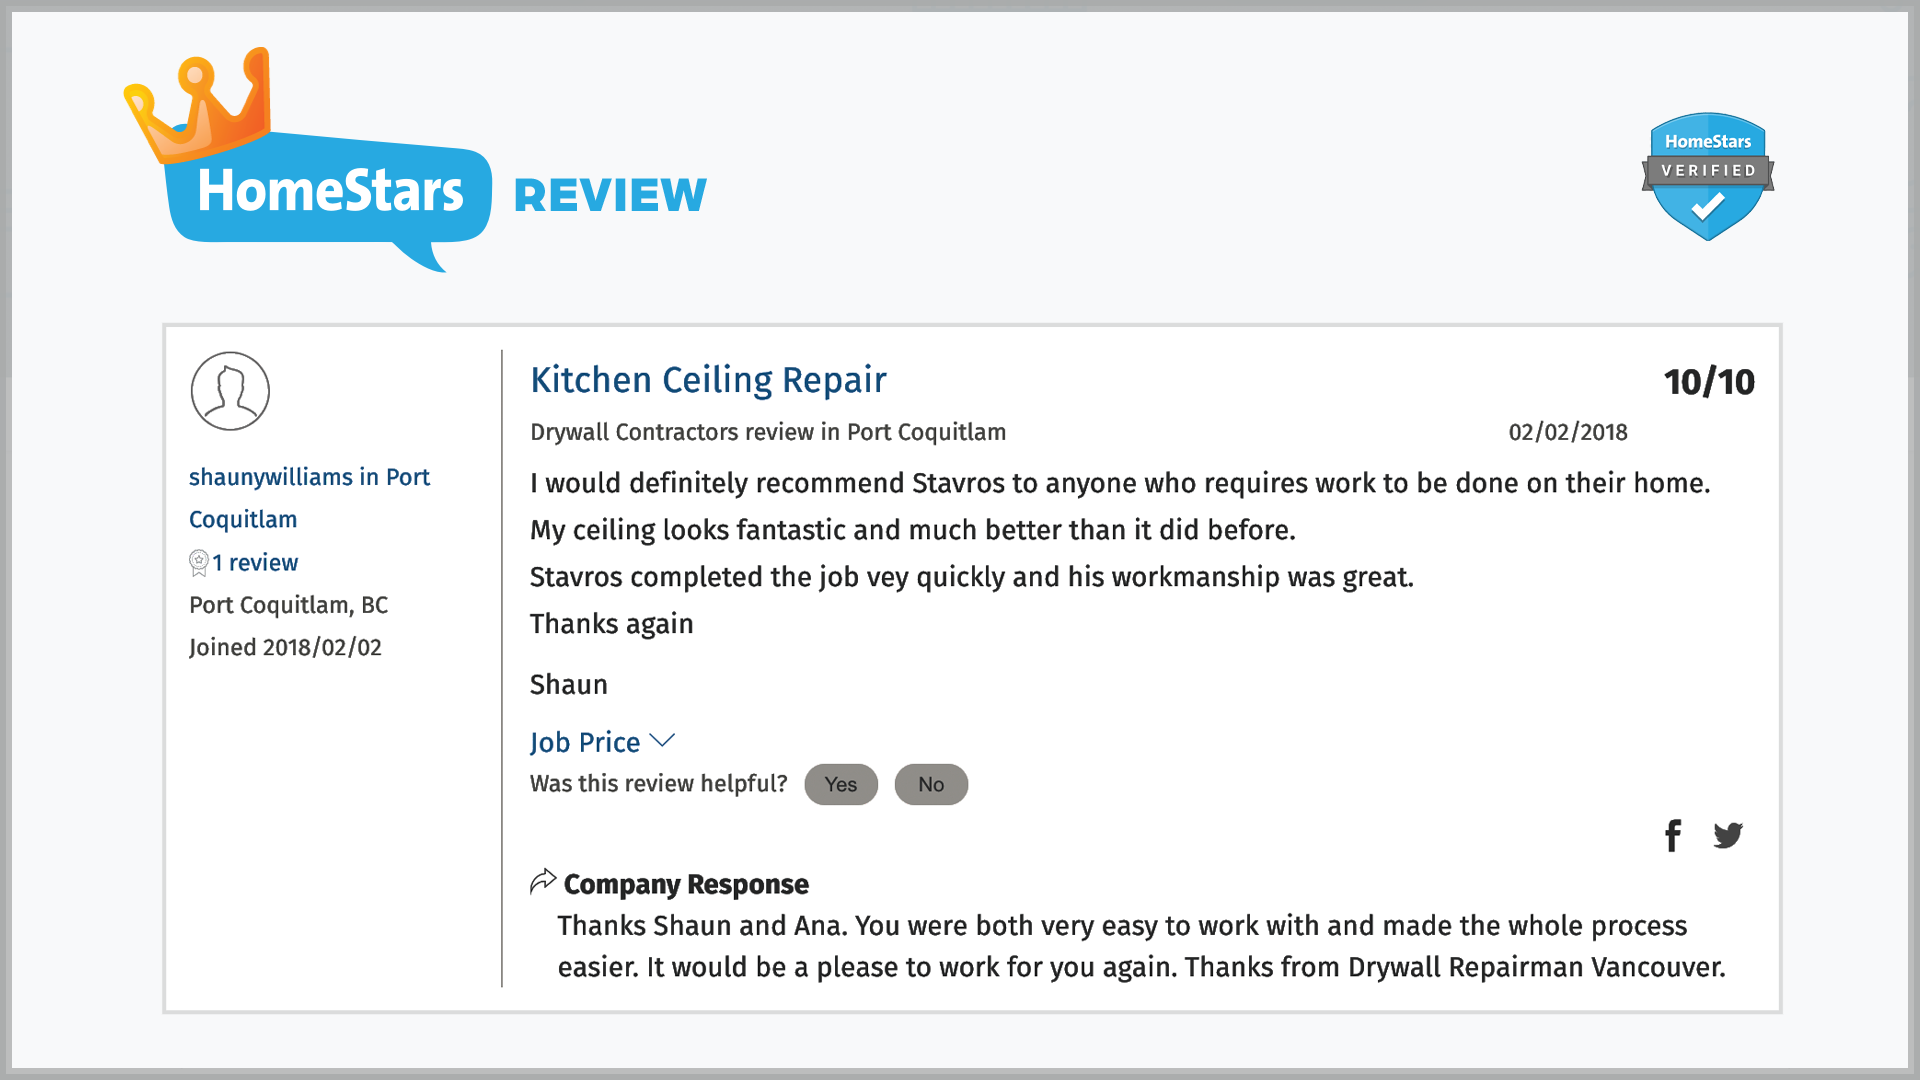 homestars-review-10-out-of-10-drywall-repairman-vancouver-bc-canada-8